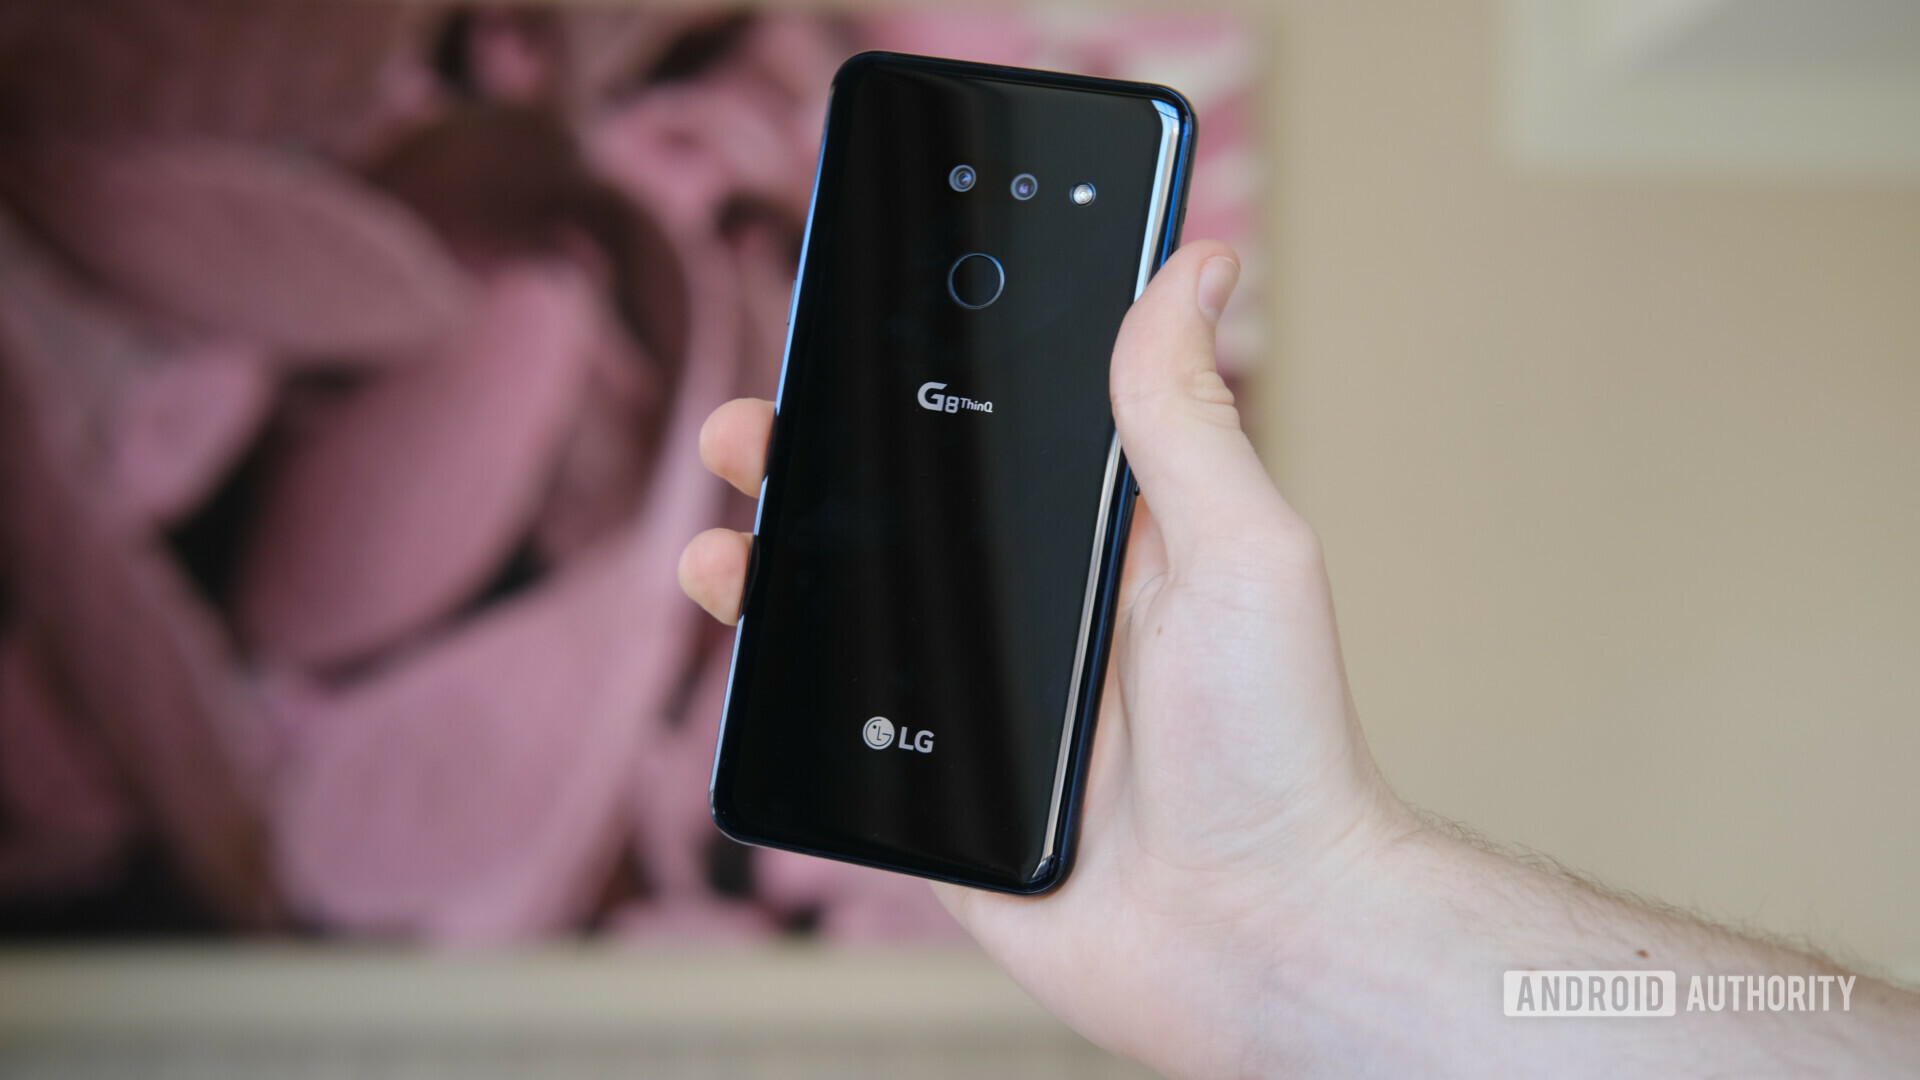 Back side photo of the LG G8 ThinQ held in a hand.